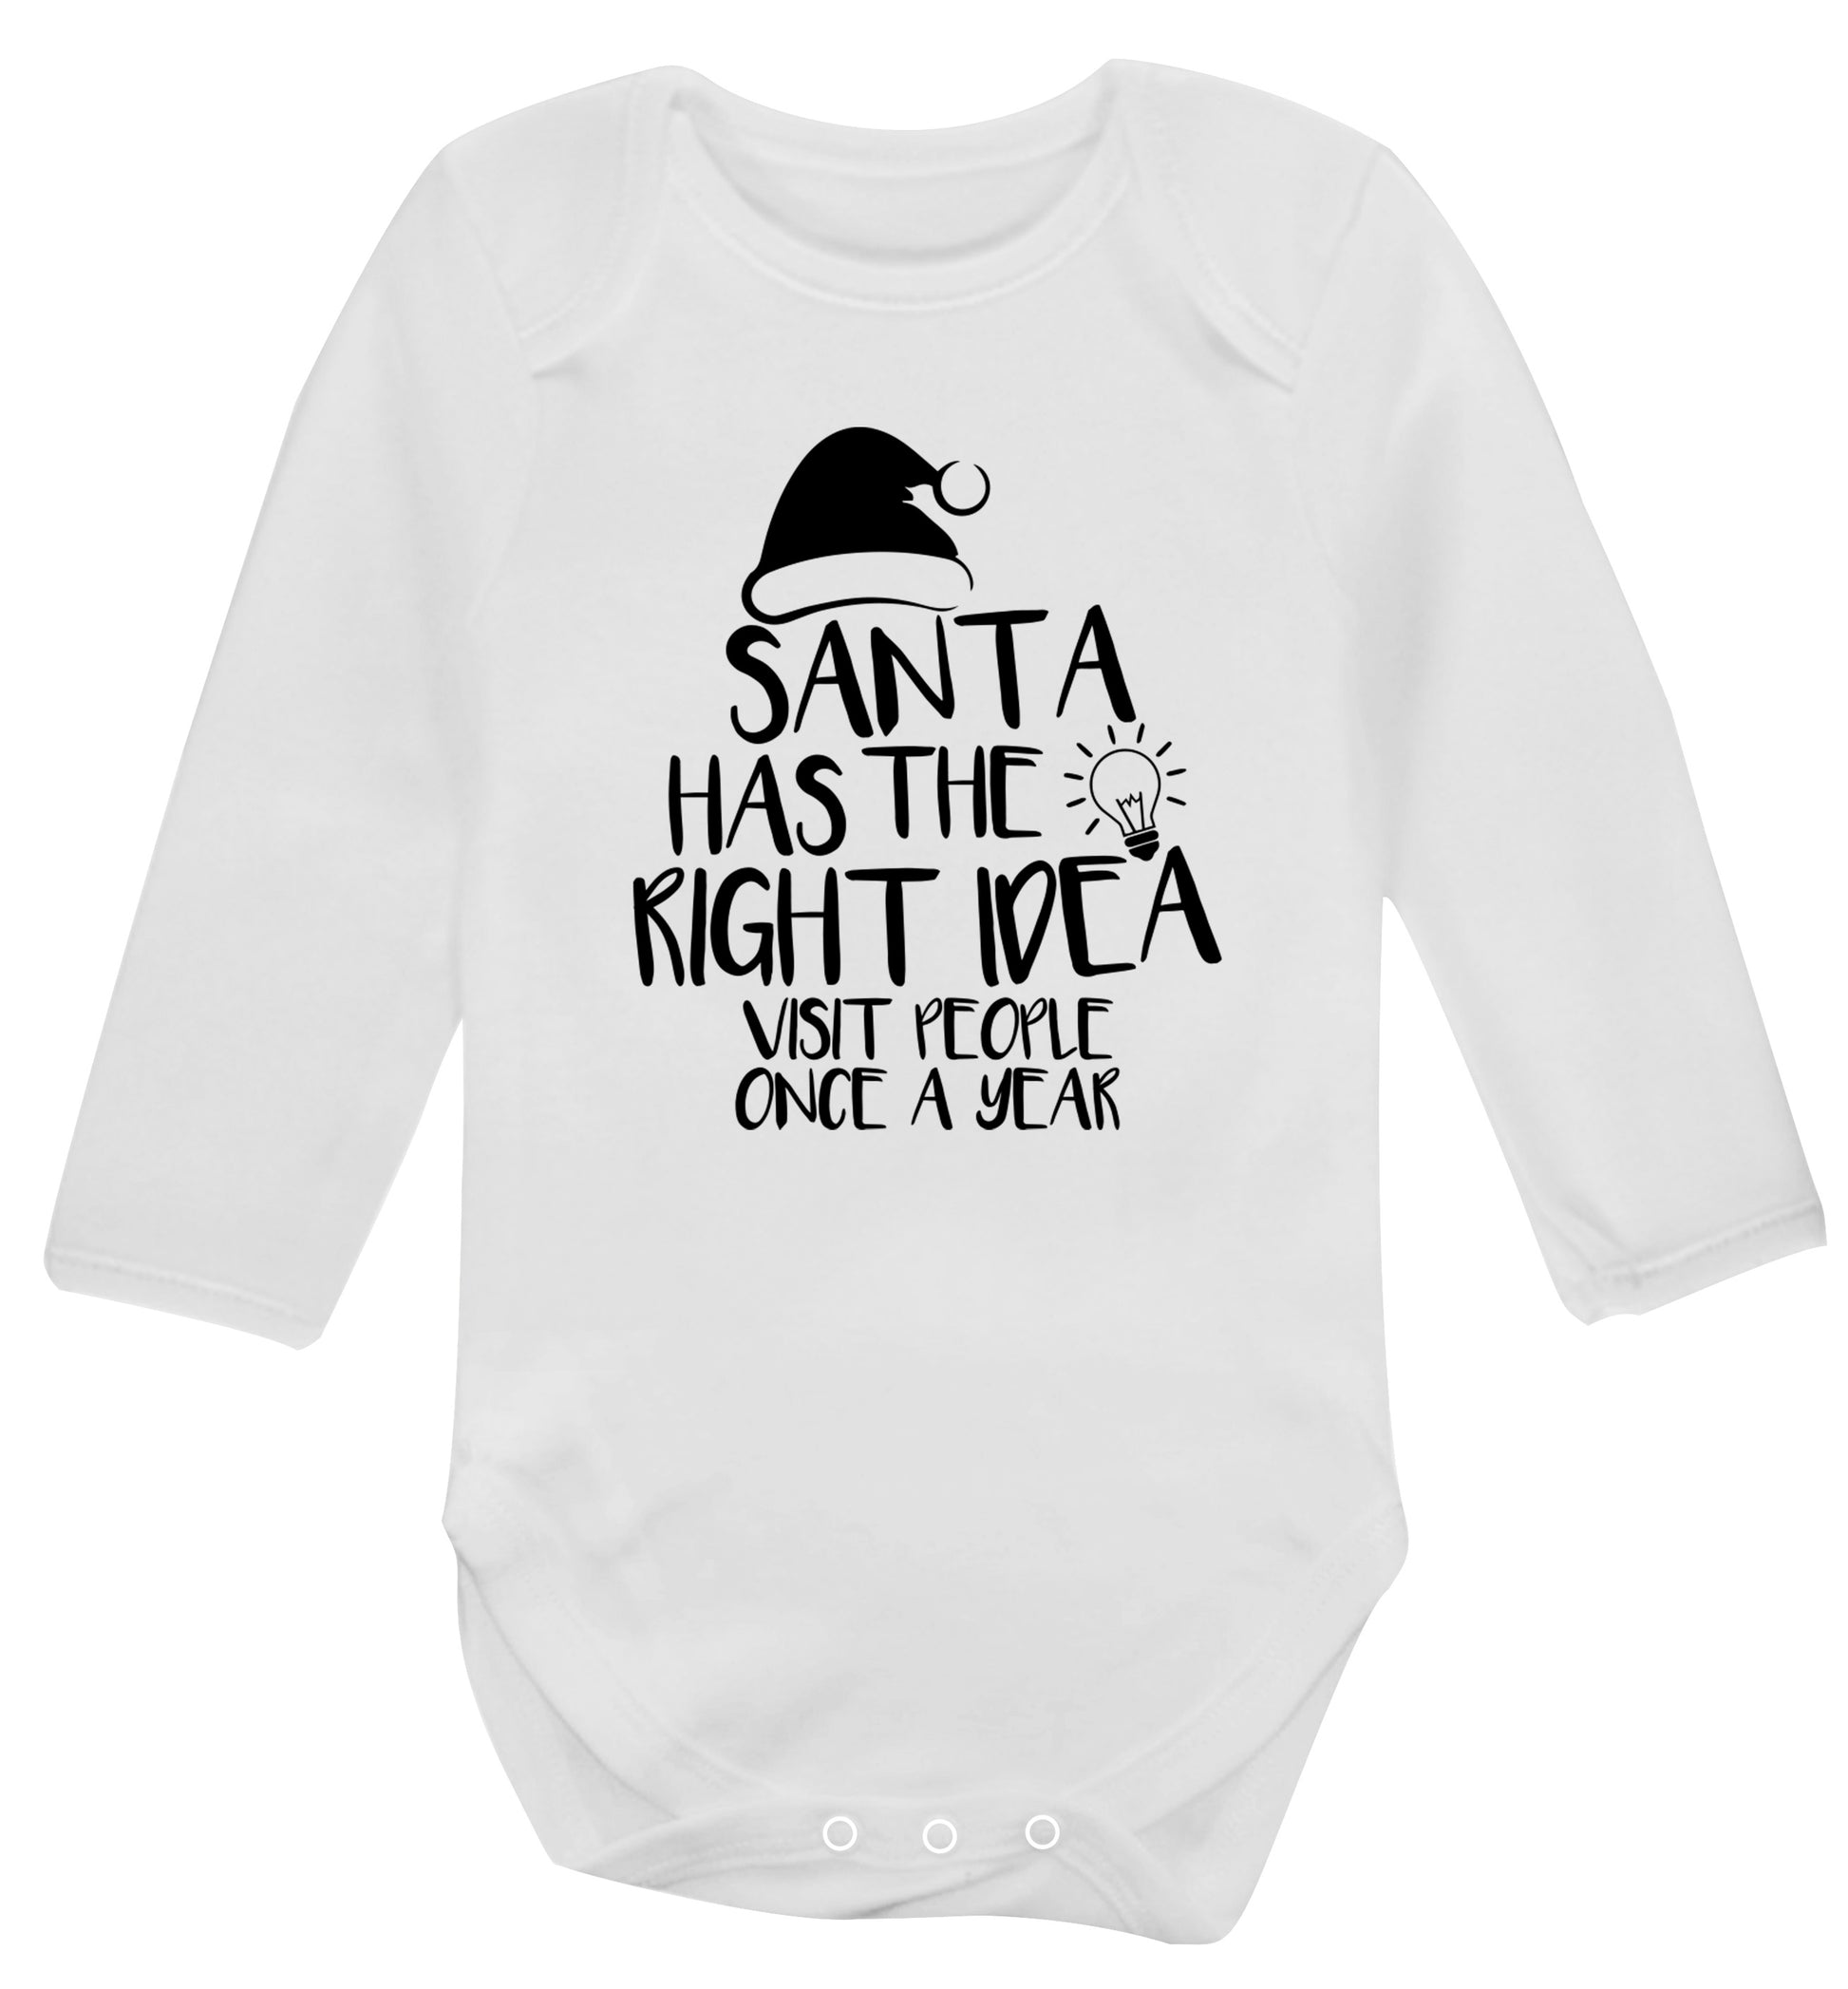 Santa has the right idea visit people once a year Baby Vest long sleeved white 6-12 months